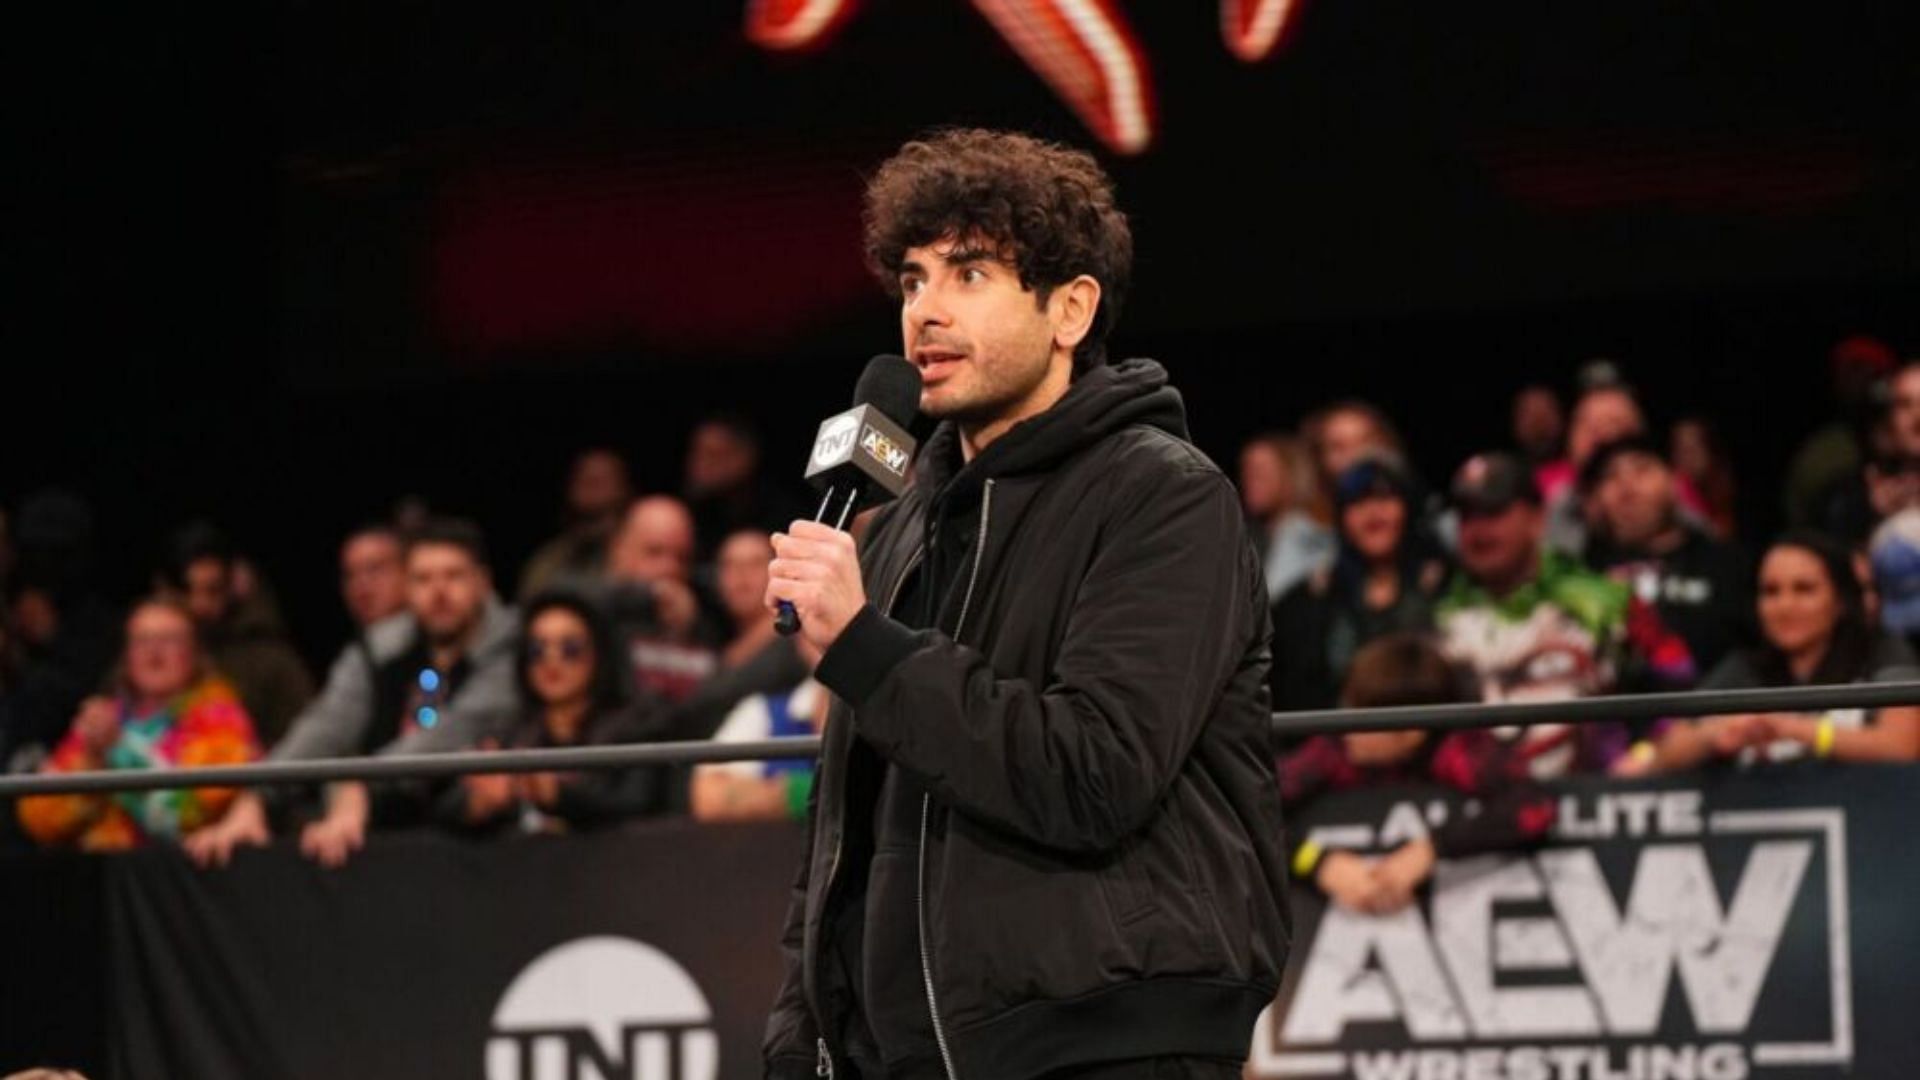 Tony Khan is the owner of All Elite Wrestling and Ring of Honor